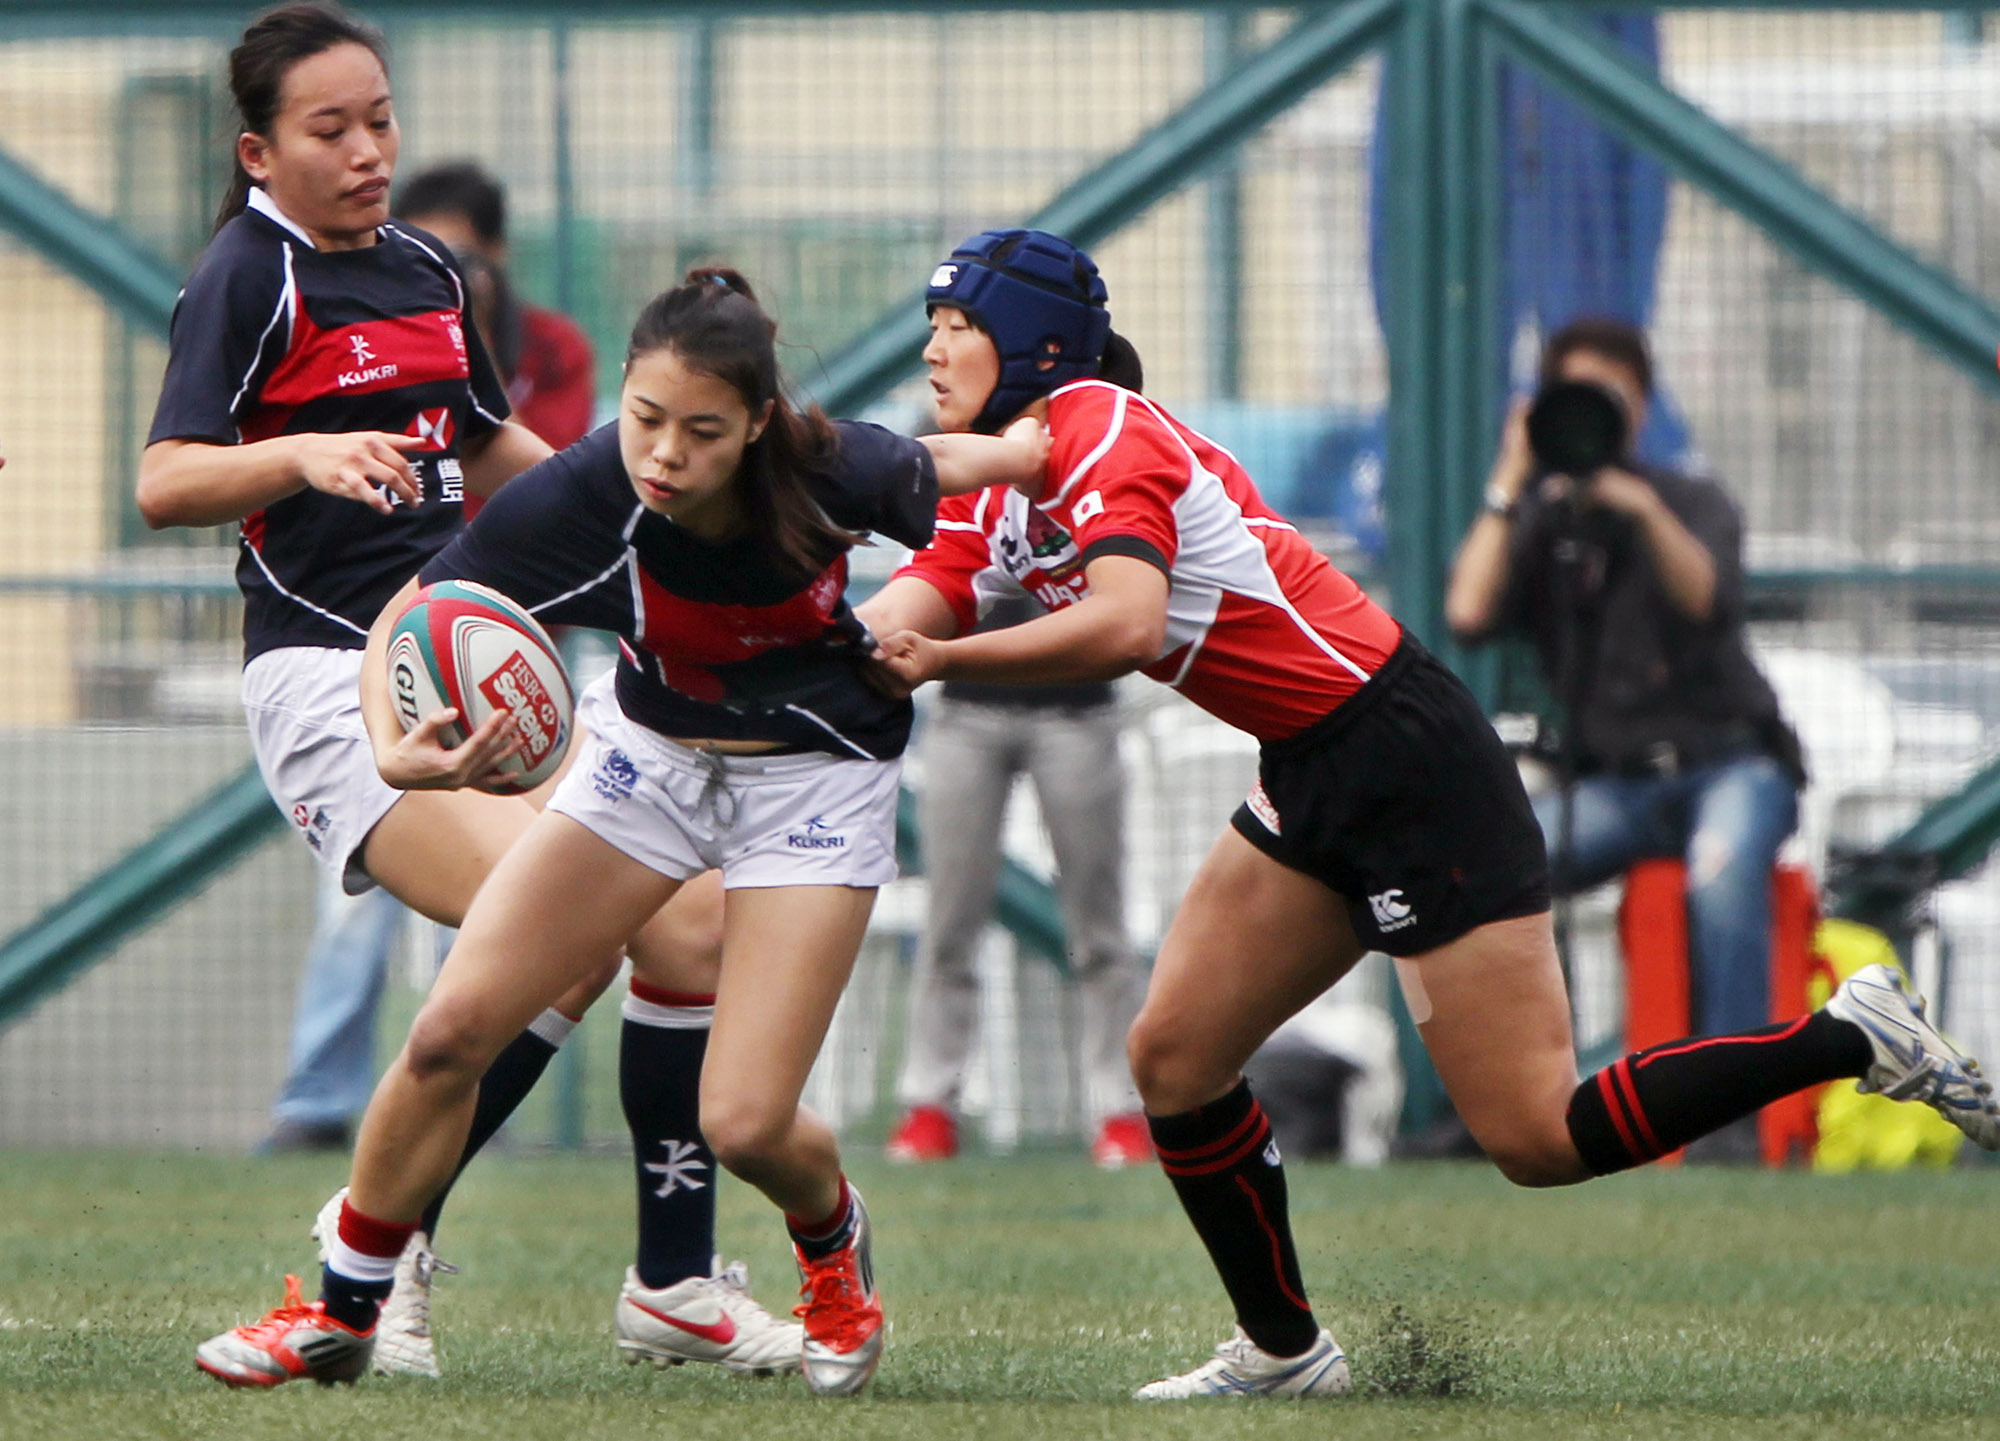 Girl's rugby is the fastest growing sport in Hong Kong and for those who demonstrate real talent it could lead to a chance to compete on the international stage. Photo: Nora Tam/SCMP